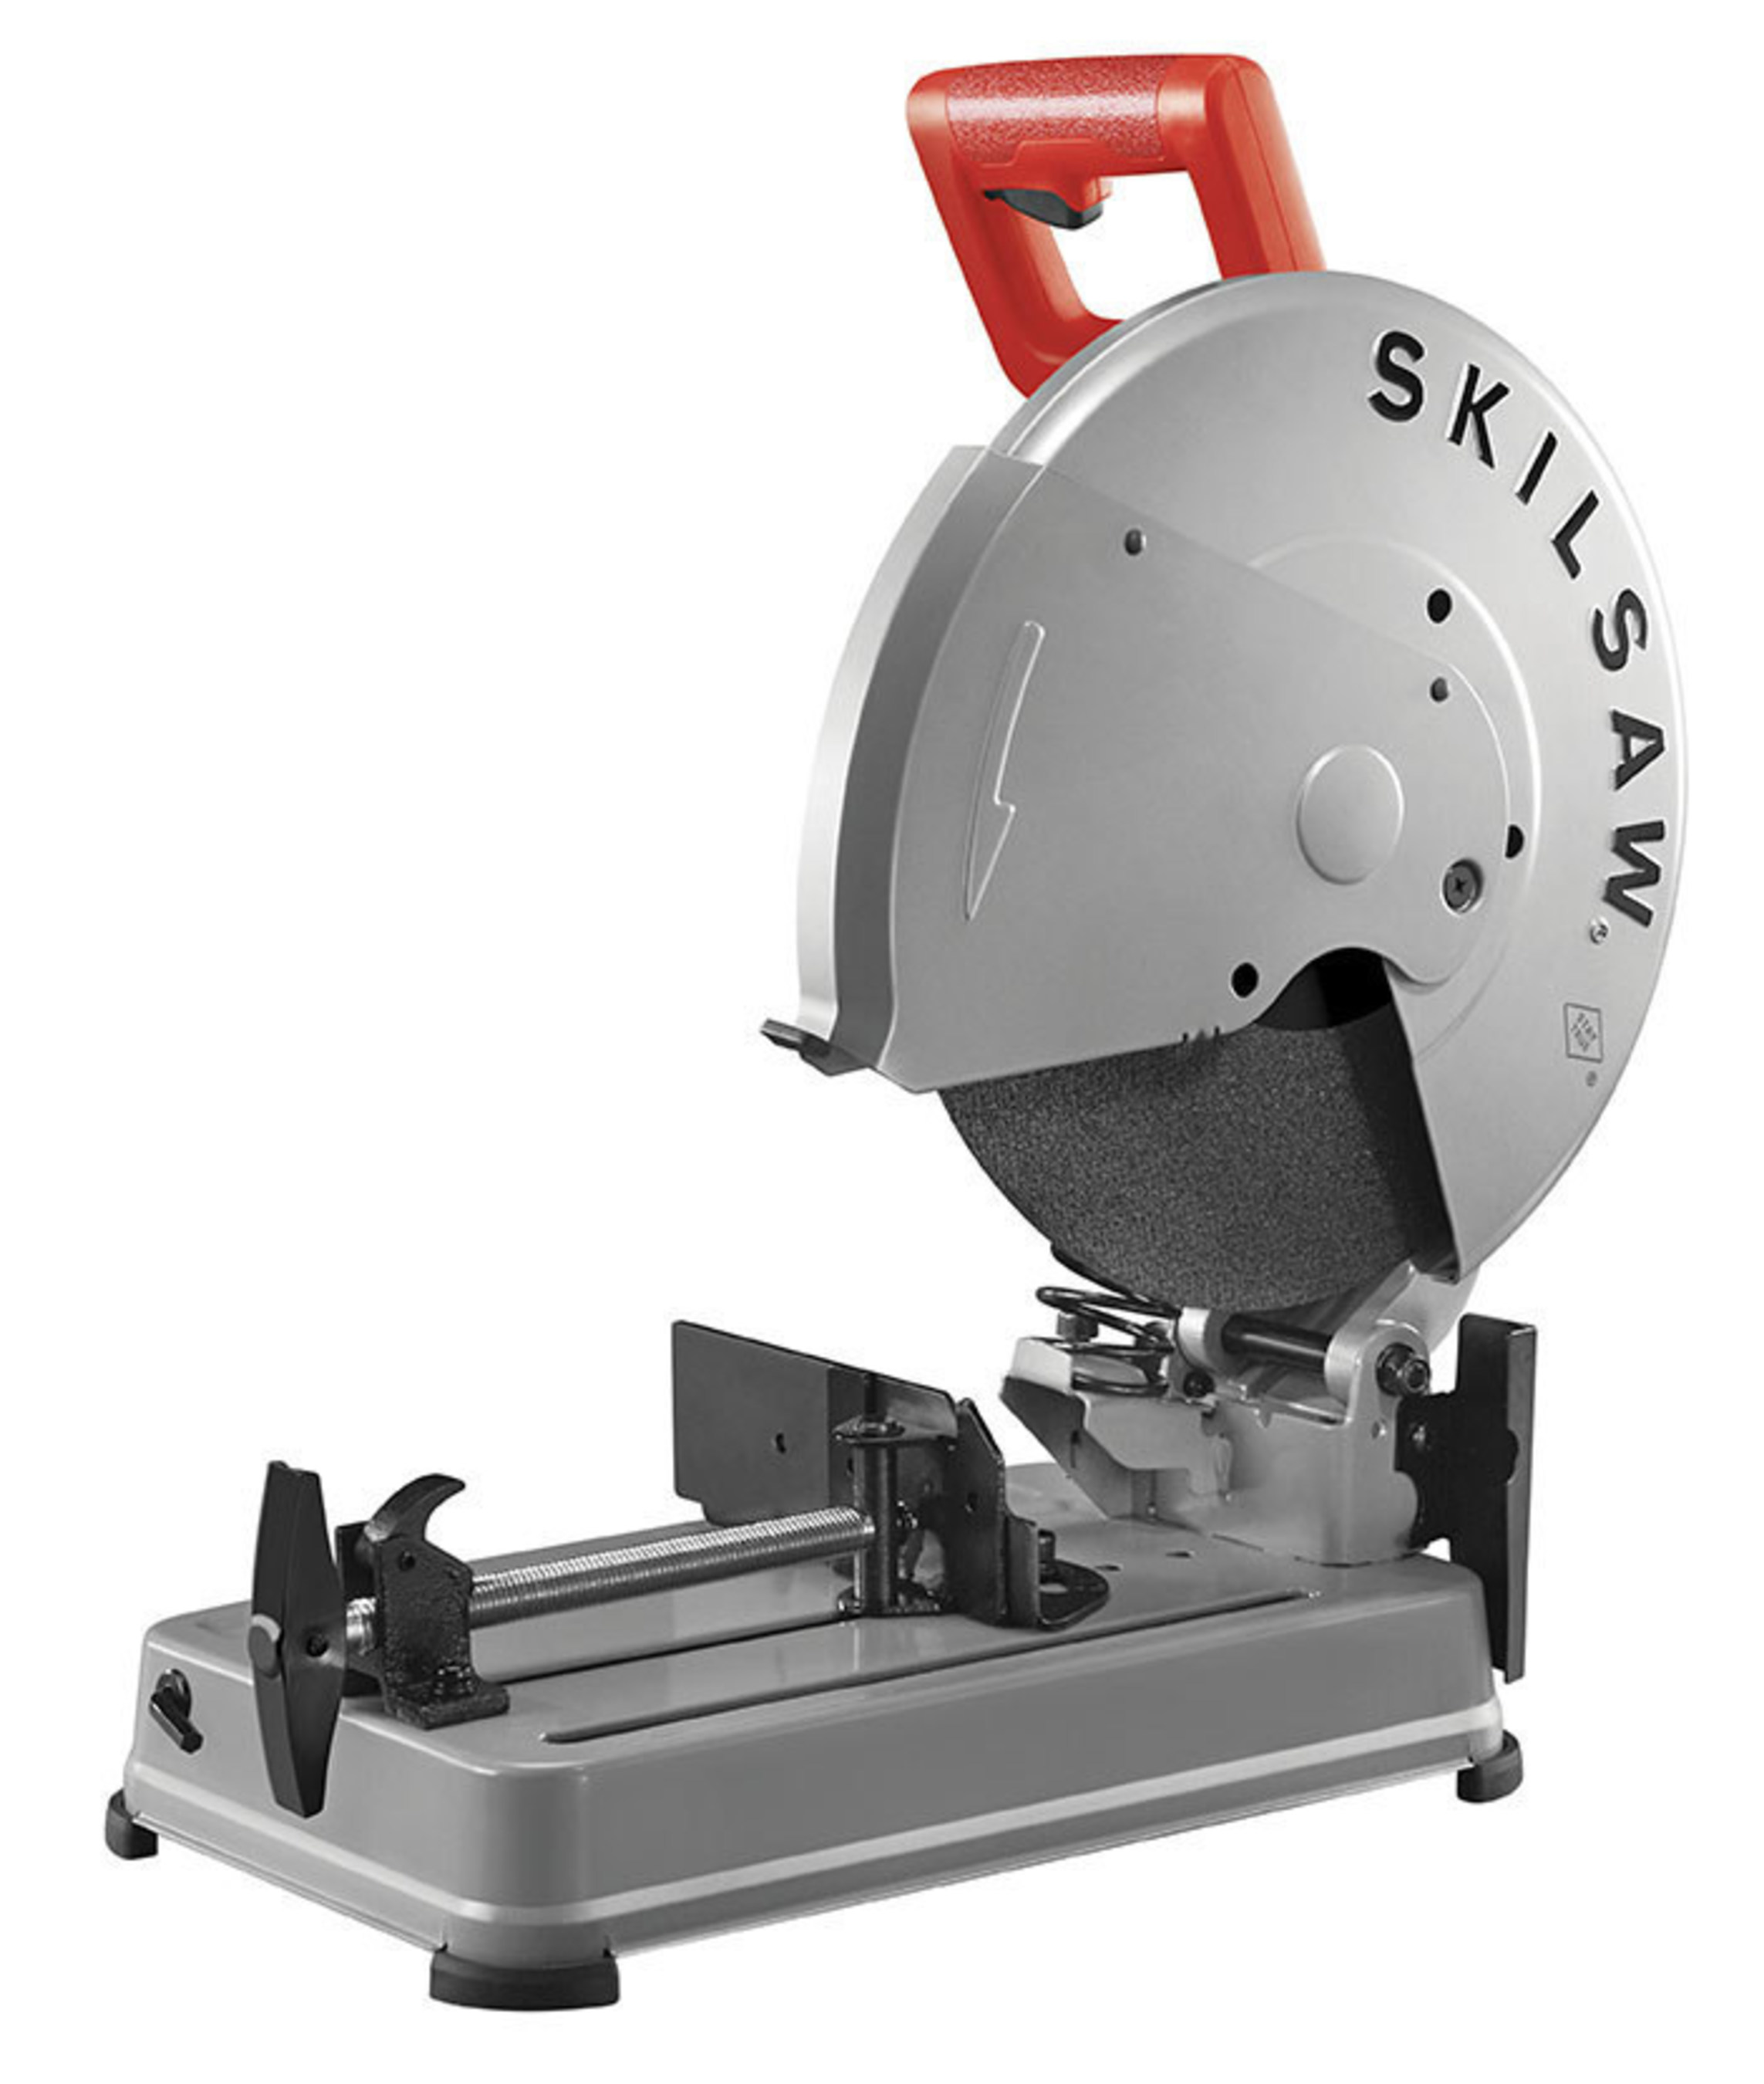 The SKILSAW SPT64MTA-01 14-inch Abrasive Cut Off Saw comes packaged with a high performance powertrain for optimal power and versatility needed for various metal cutting applications both in the shop and out on the jobsite.